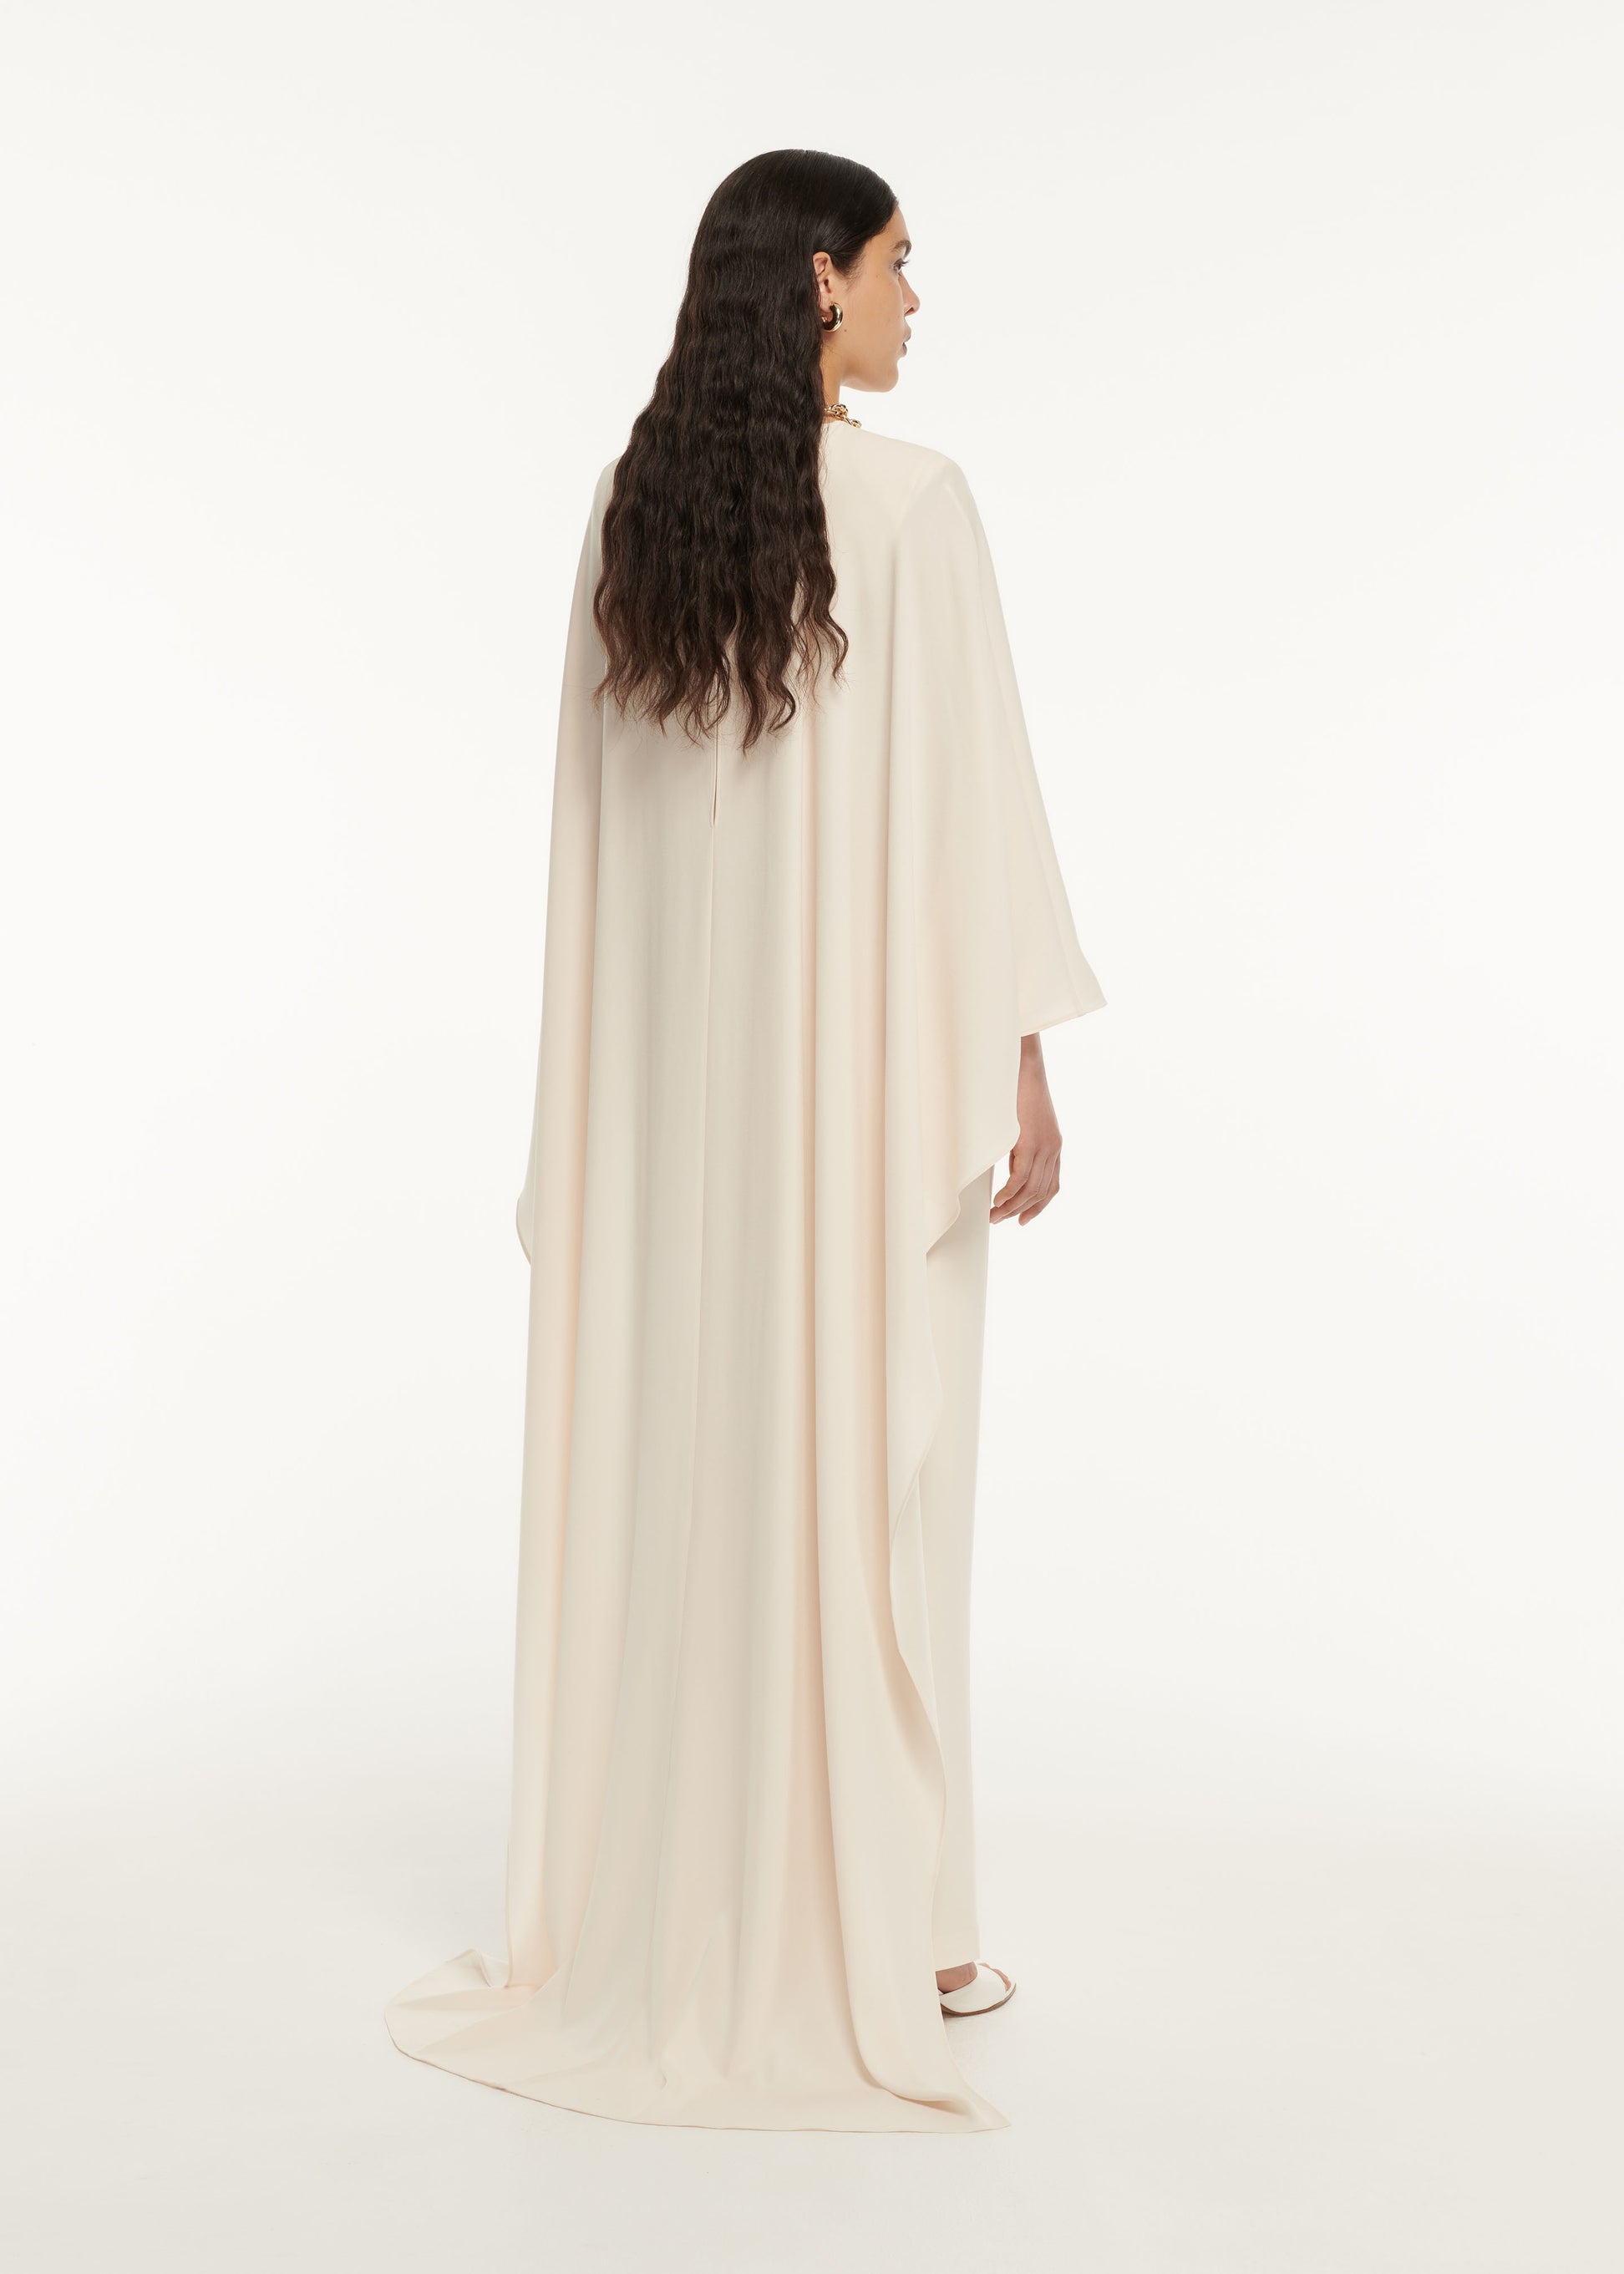 The back of a woman wearing the Long Sleeve Satin Crepe Midi Dress